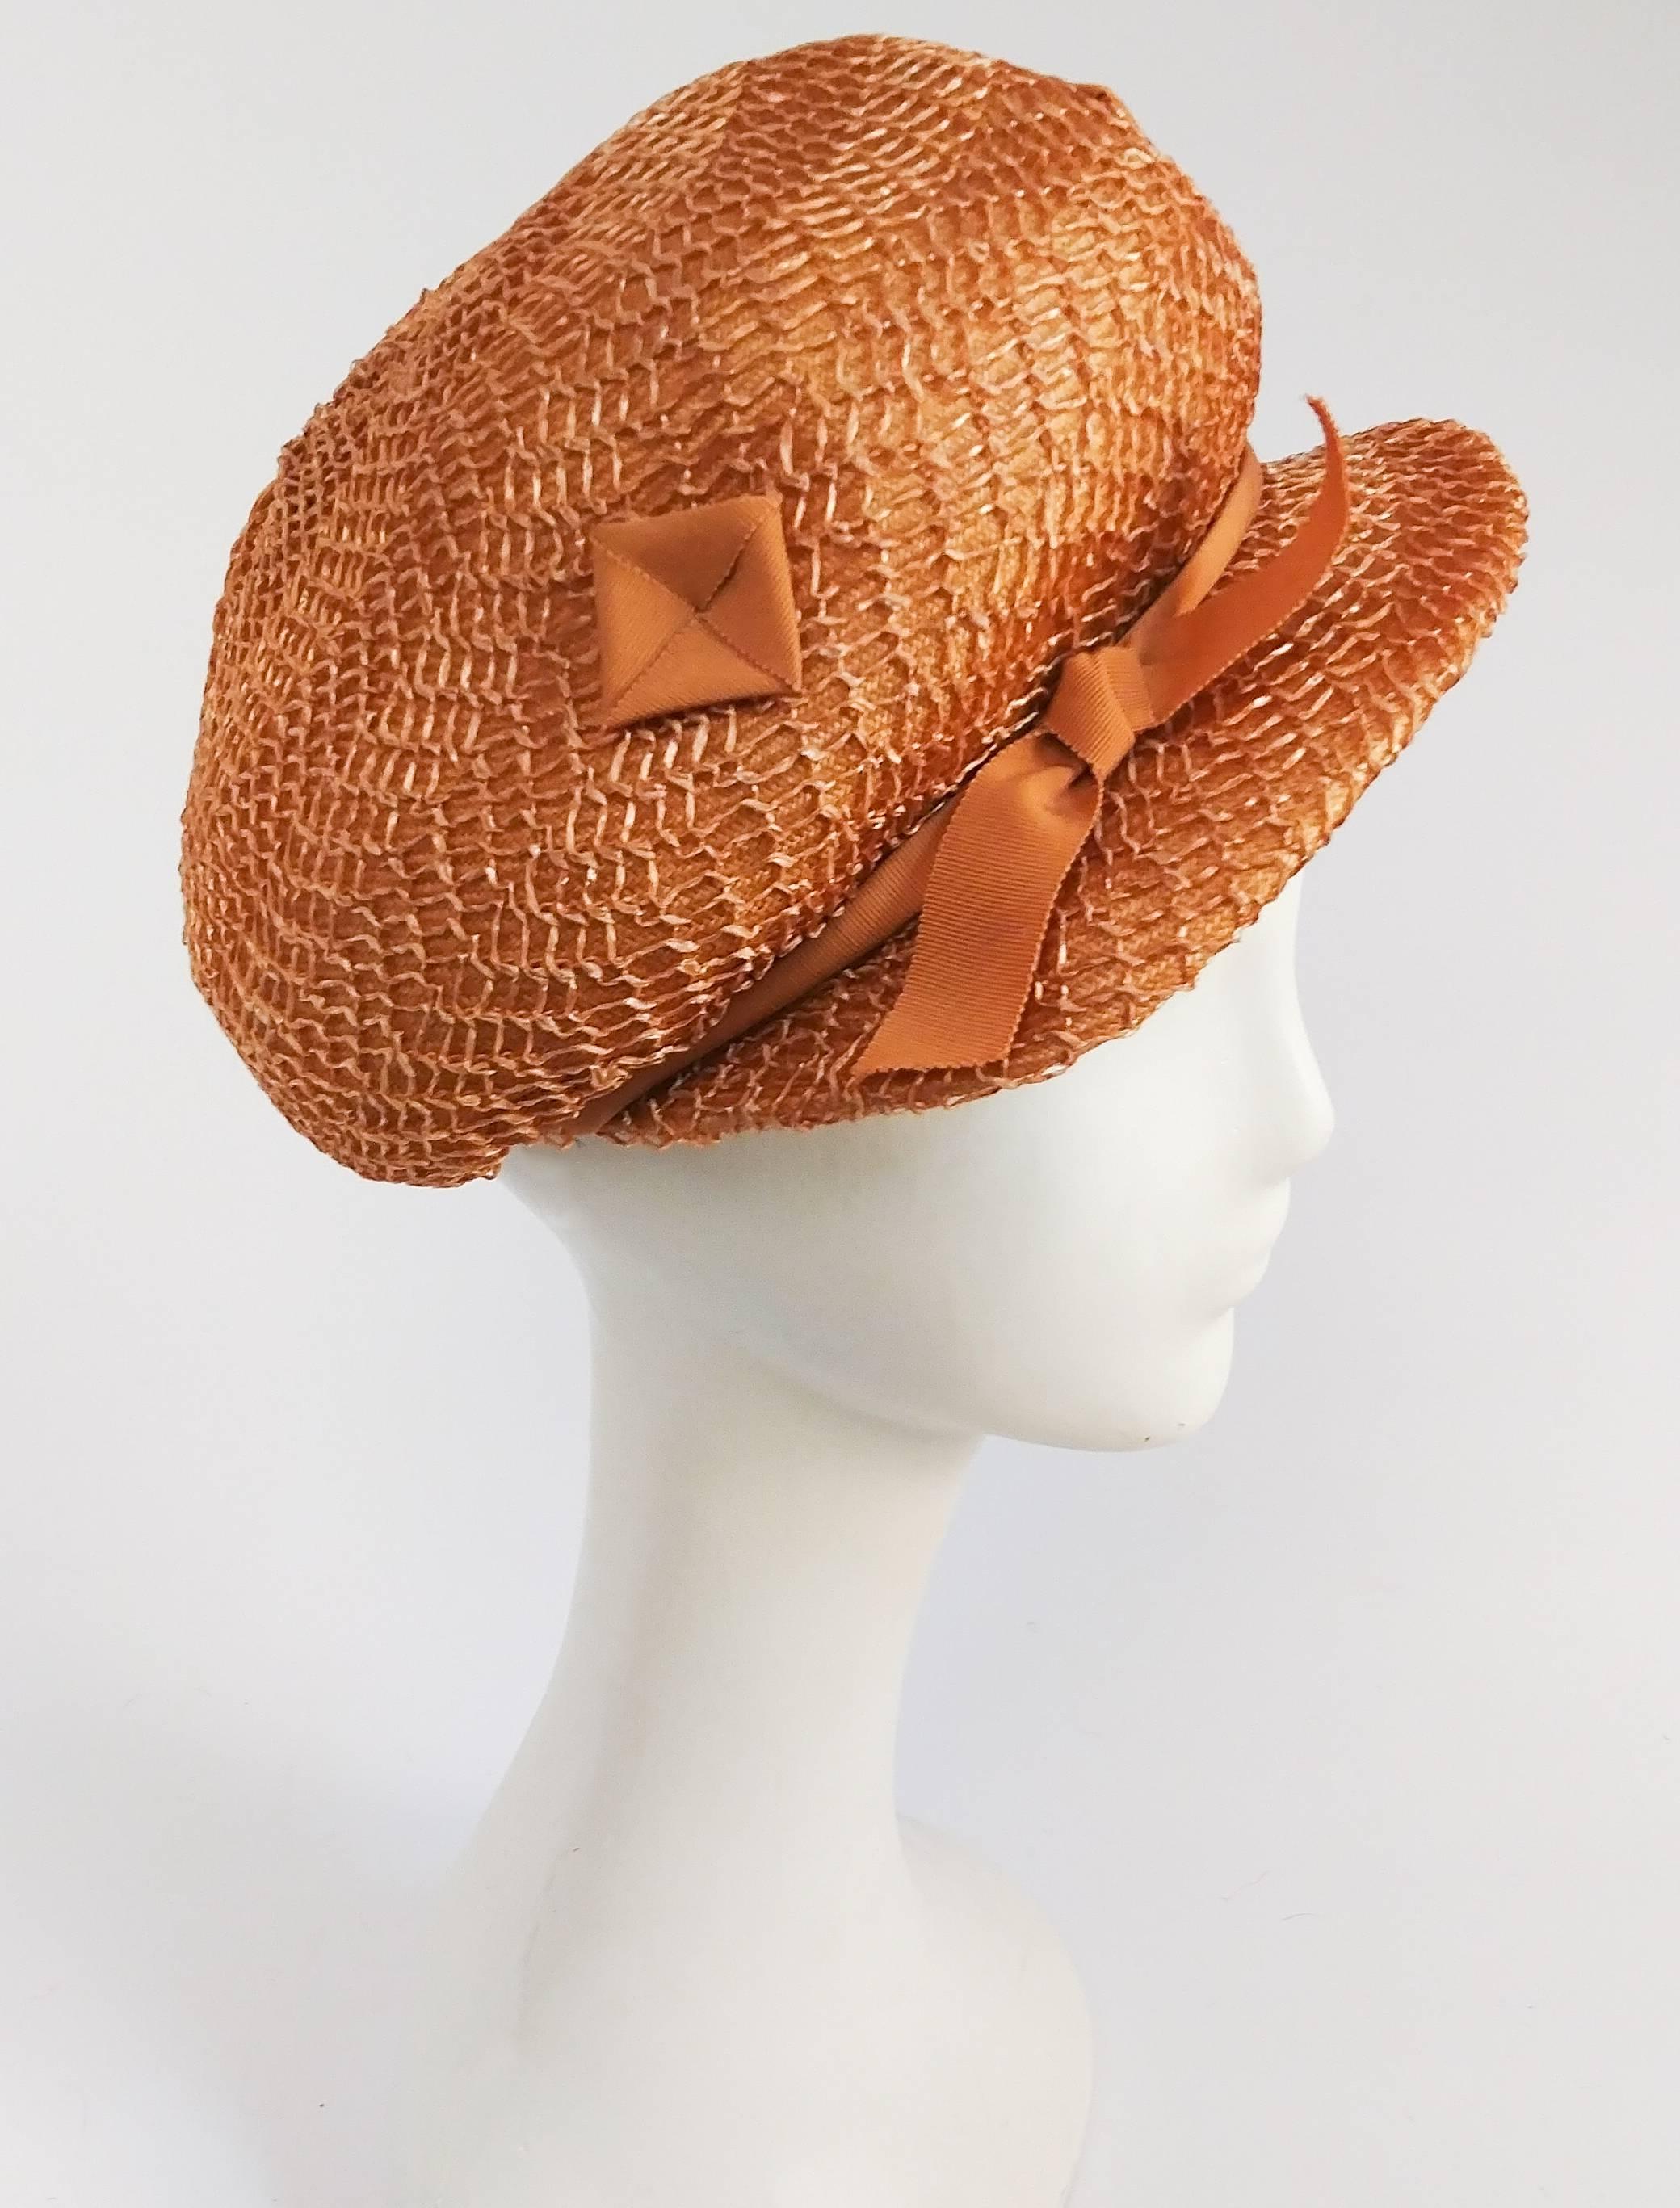 1960s Straw Cap w/ Grosgrain Ribbon Detail. Puffy woven straw cap with brim embellished with little folded grosgrain ribbon squares.  